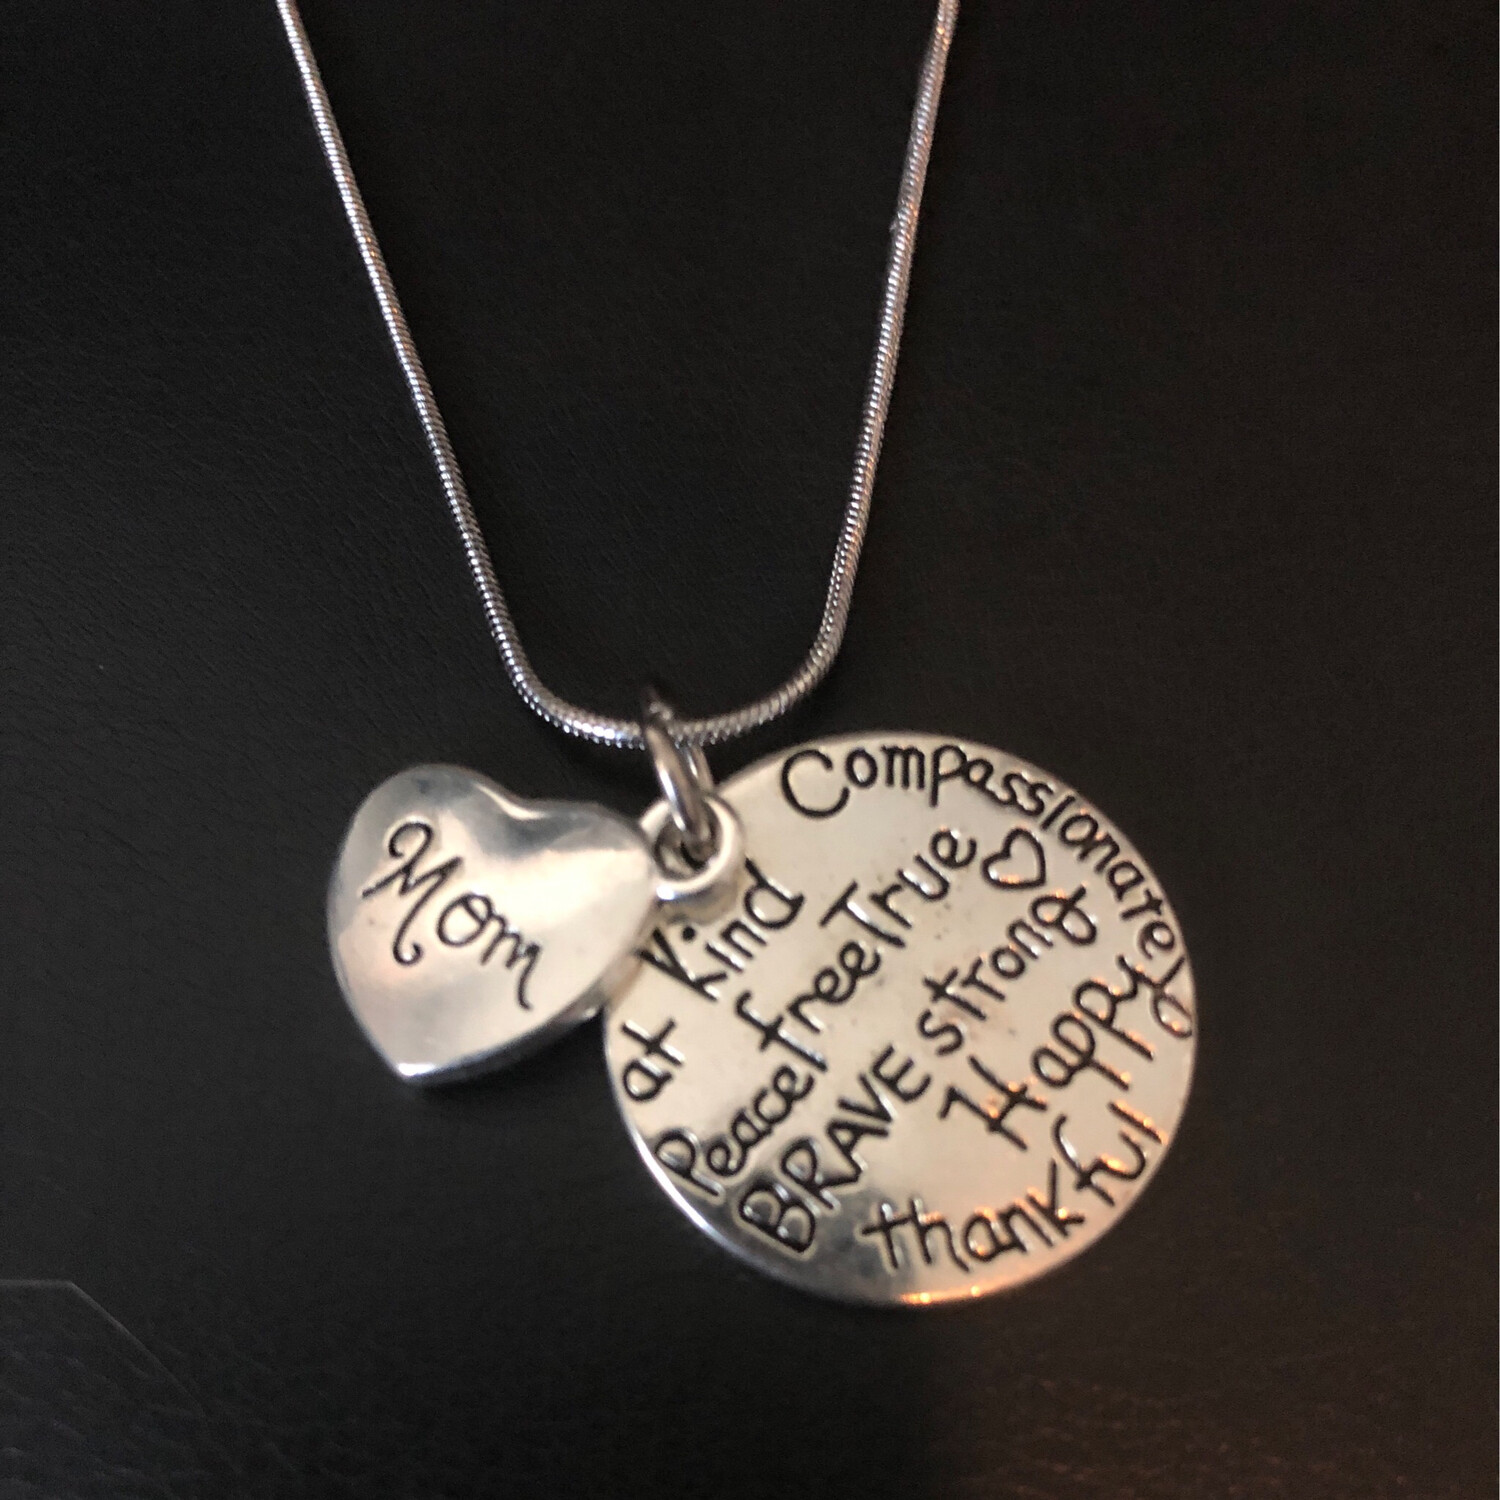 Mom, Kind, Free, True Necklace